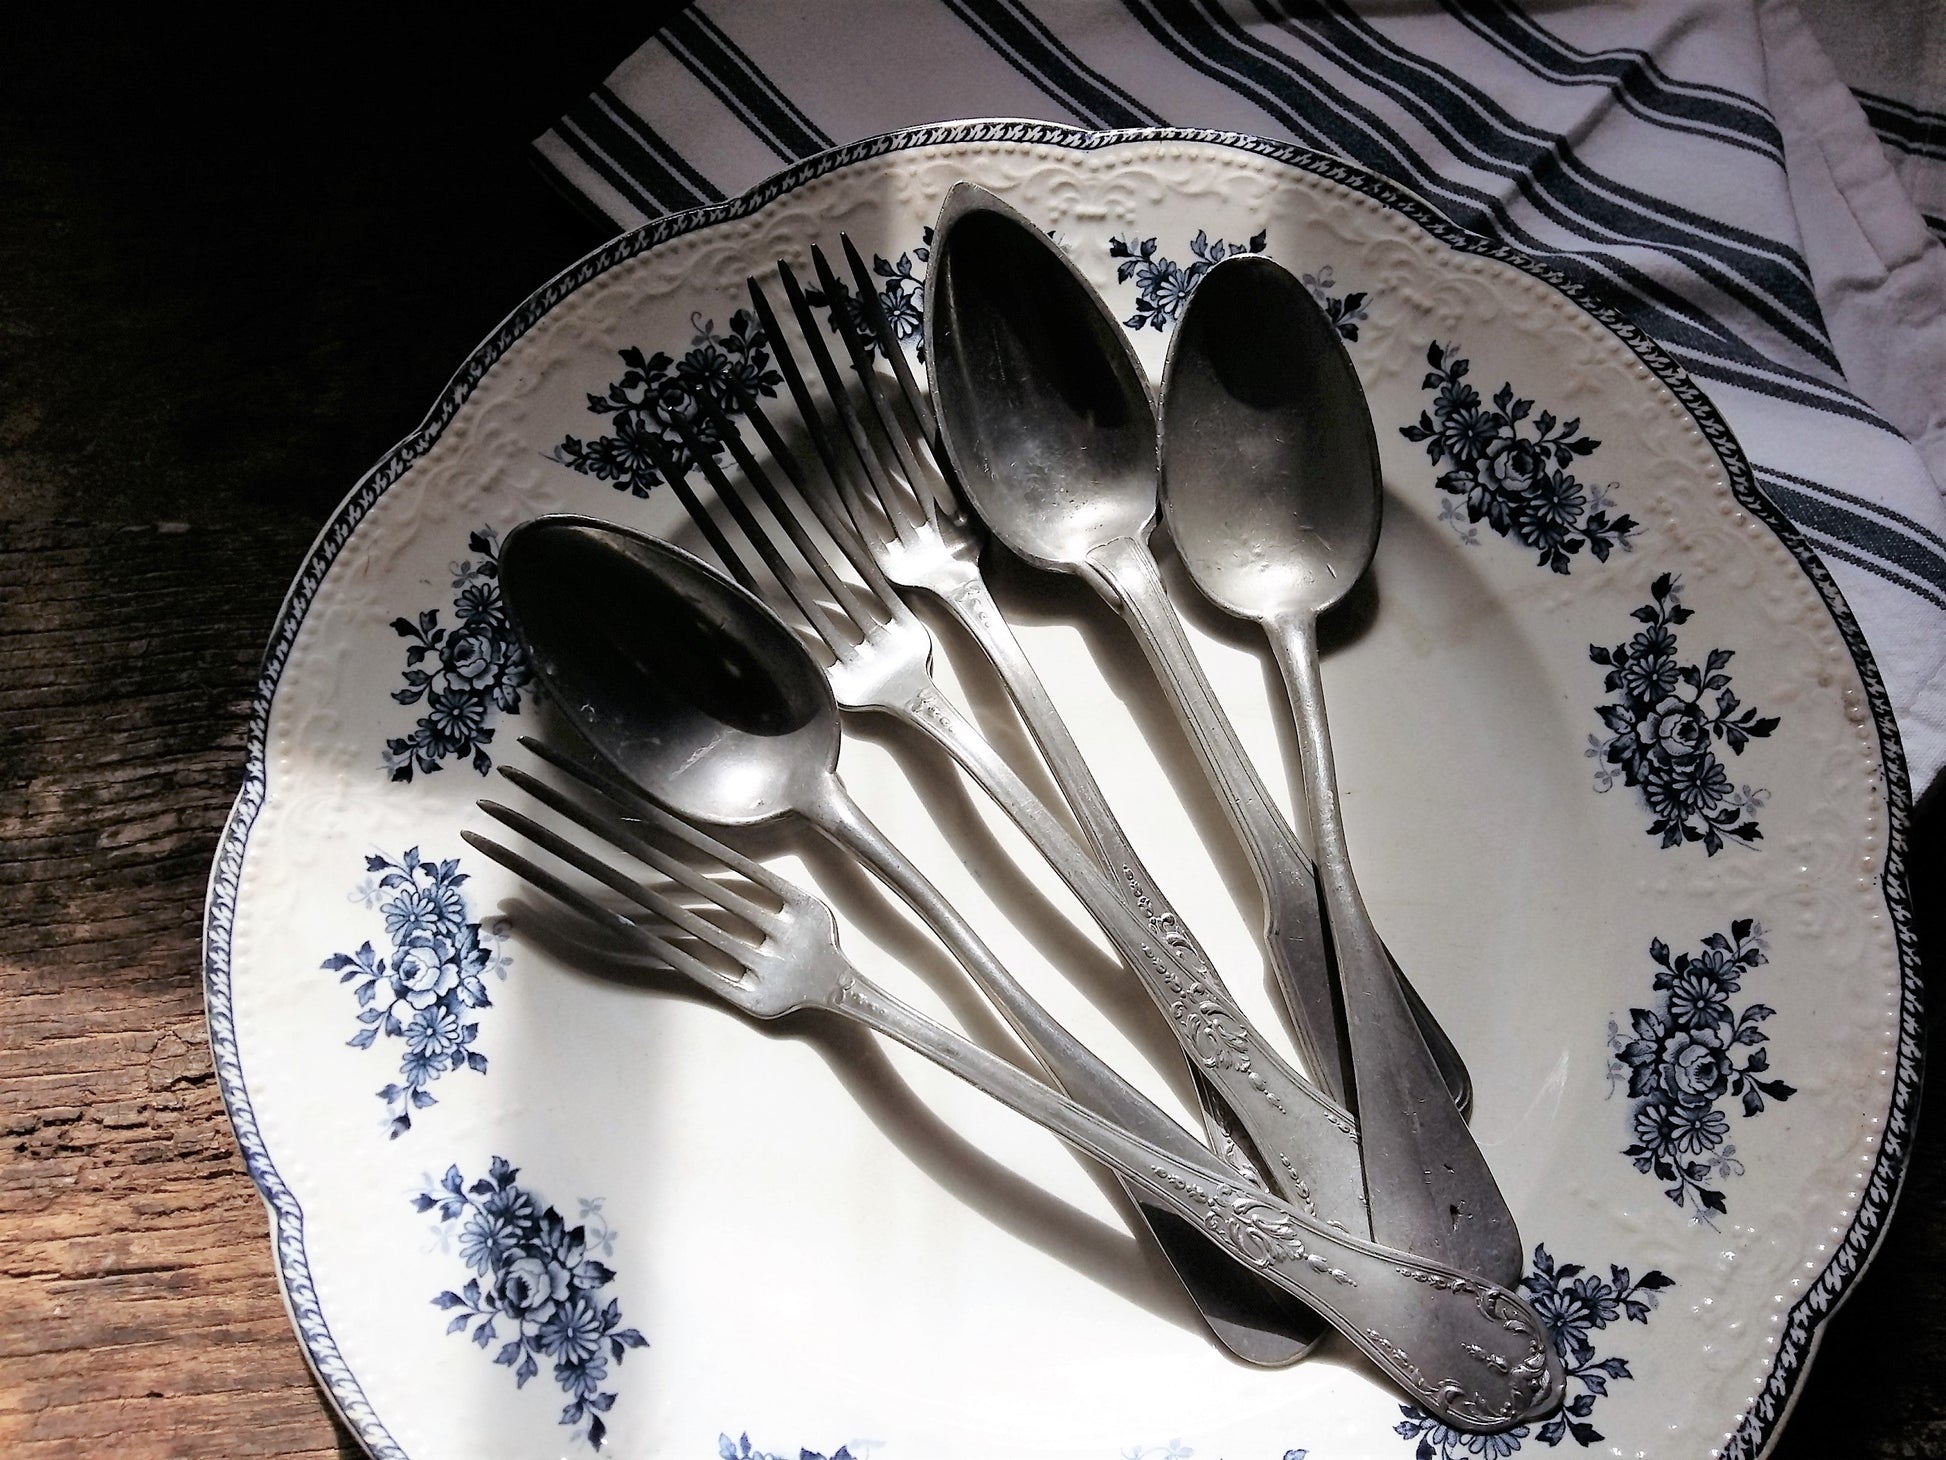 6 Antique Forks & Spoons. Ornate Metal Forks and Dessert Spoons. from Tiggy & Pip - €56.00! Shop now at Tiggy and Pip